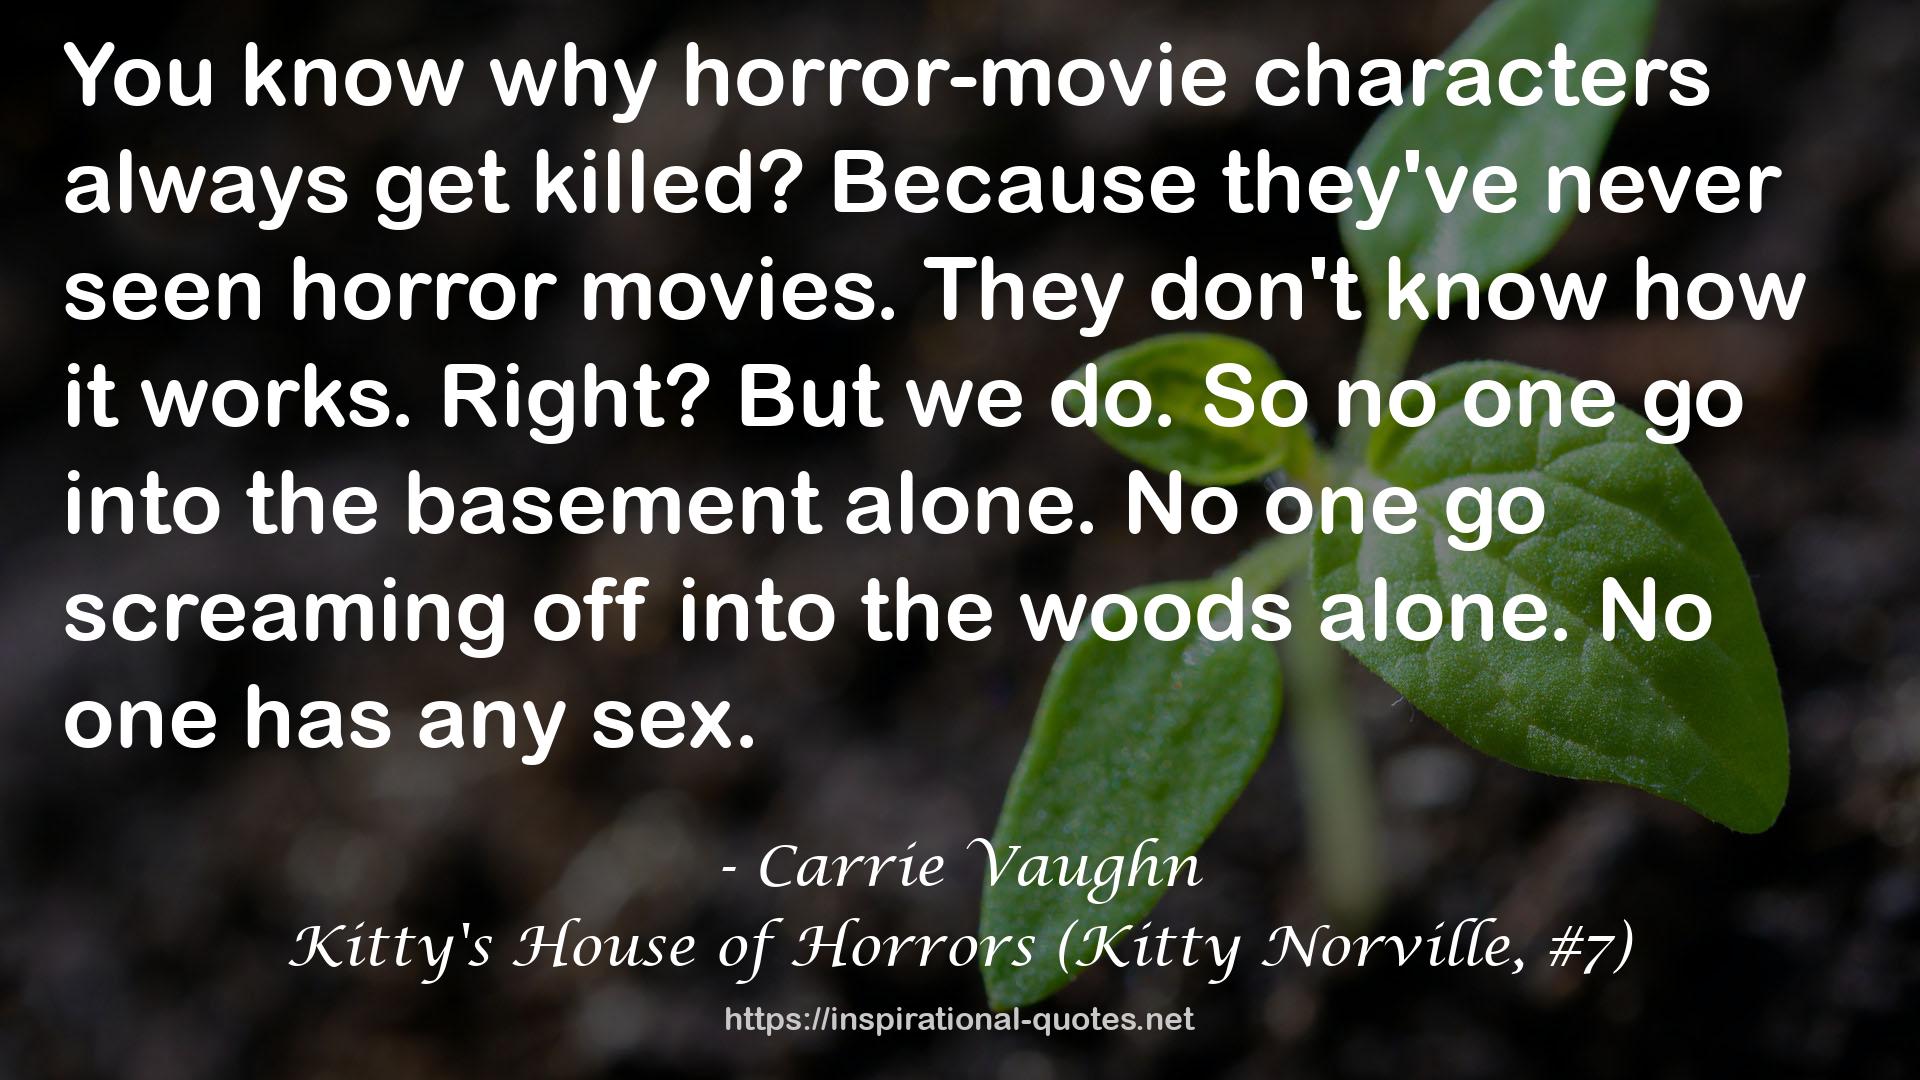 Kitty's House of Horrors (Kitty Norville, #7) QUOTES